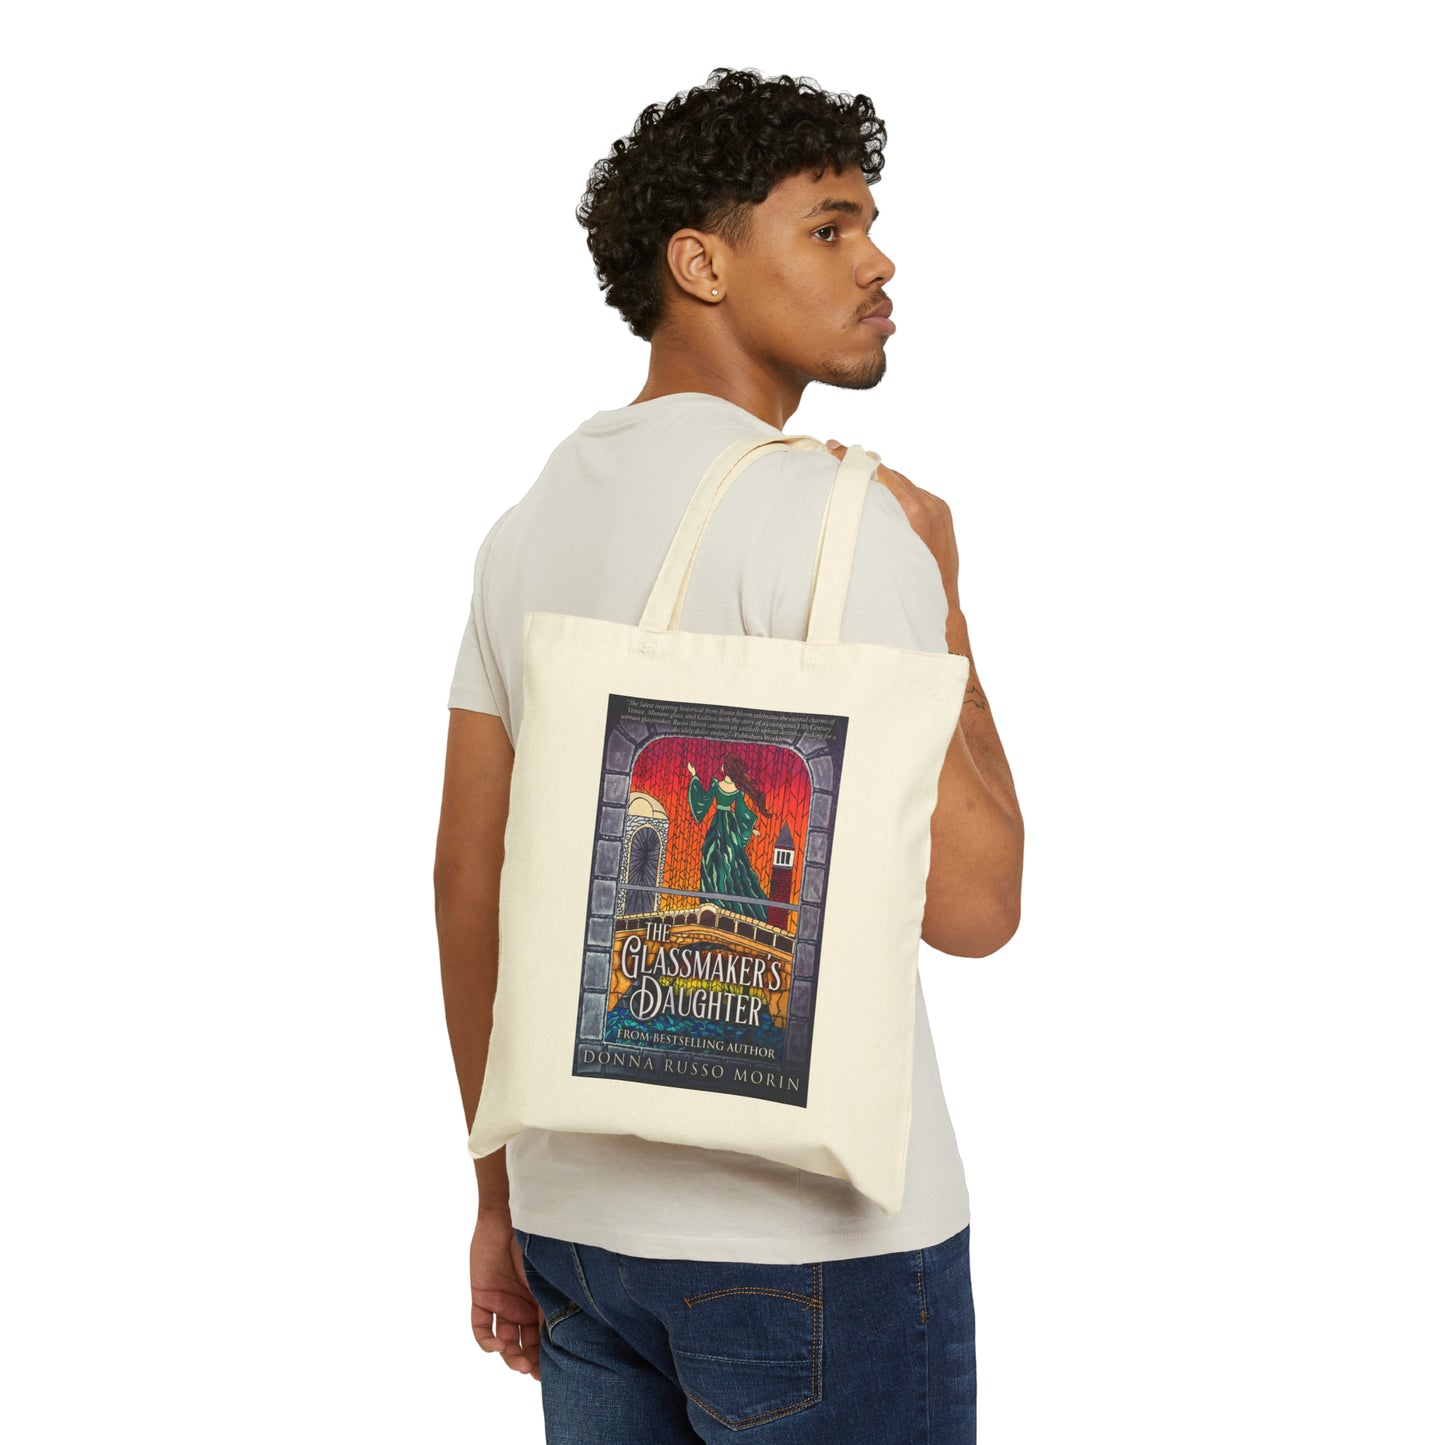 The Glassmaker's Daughter - Cotton Canvas Tote Bag